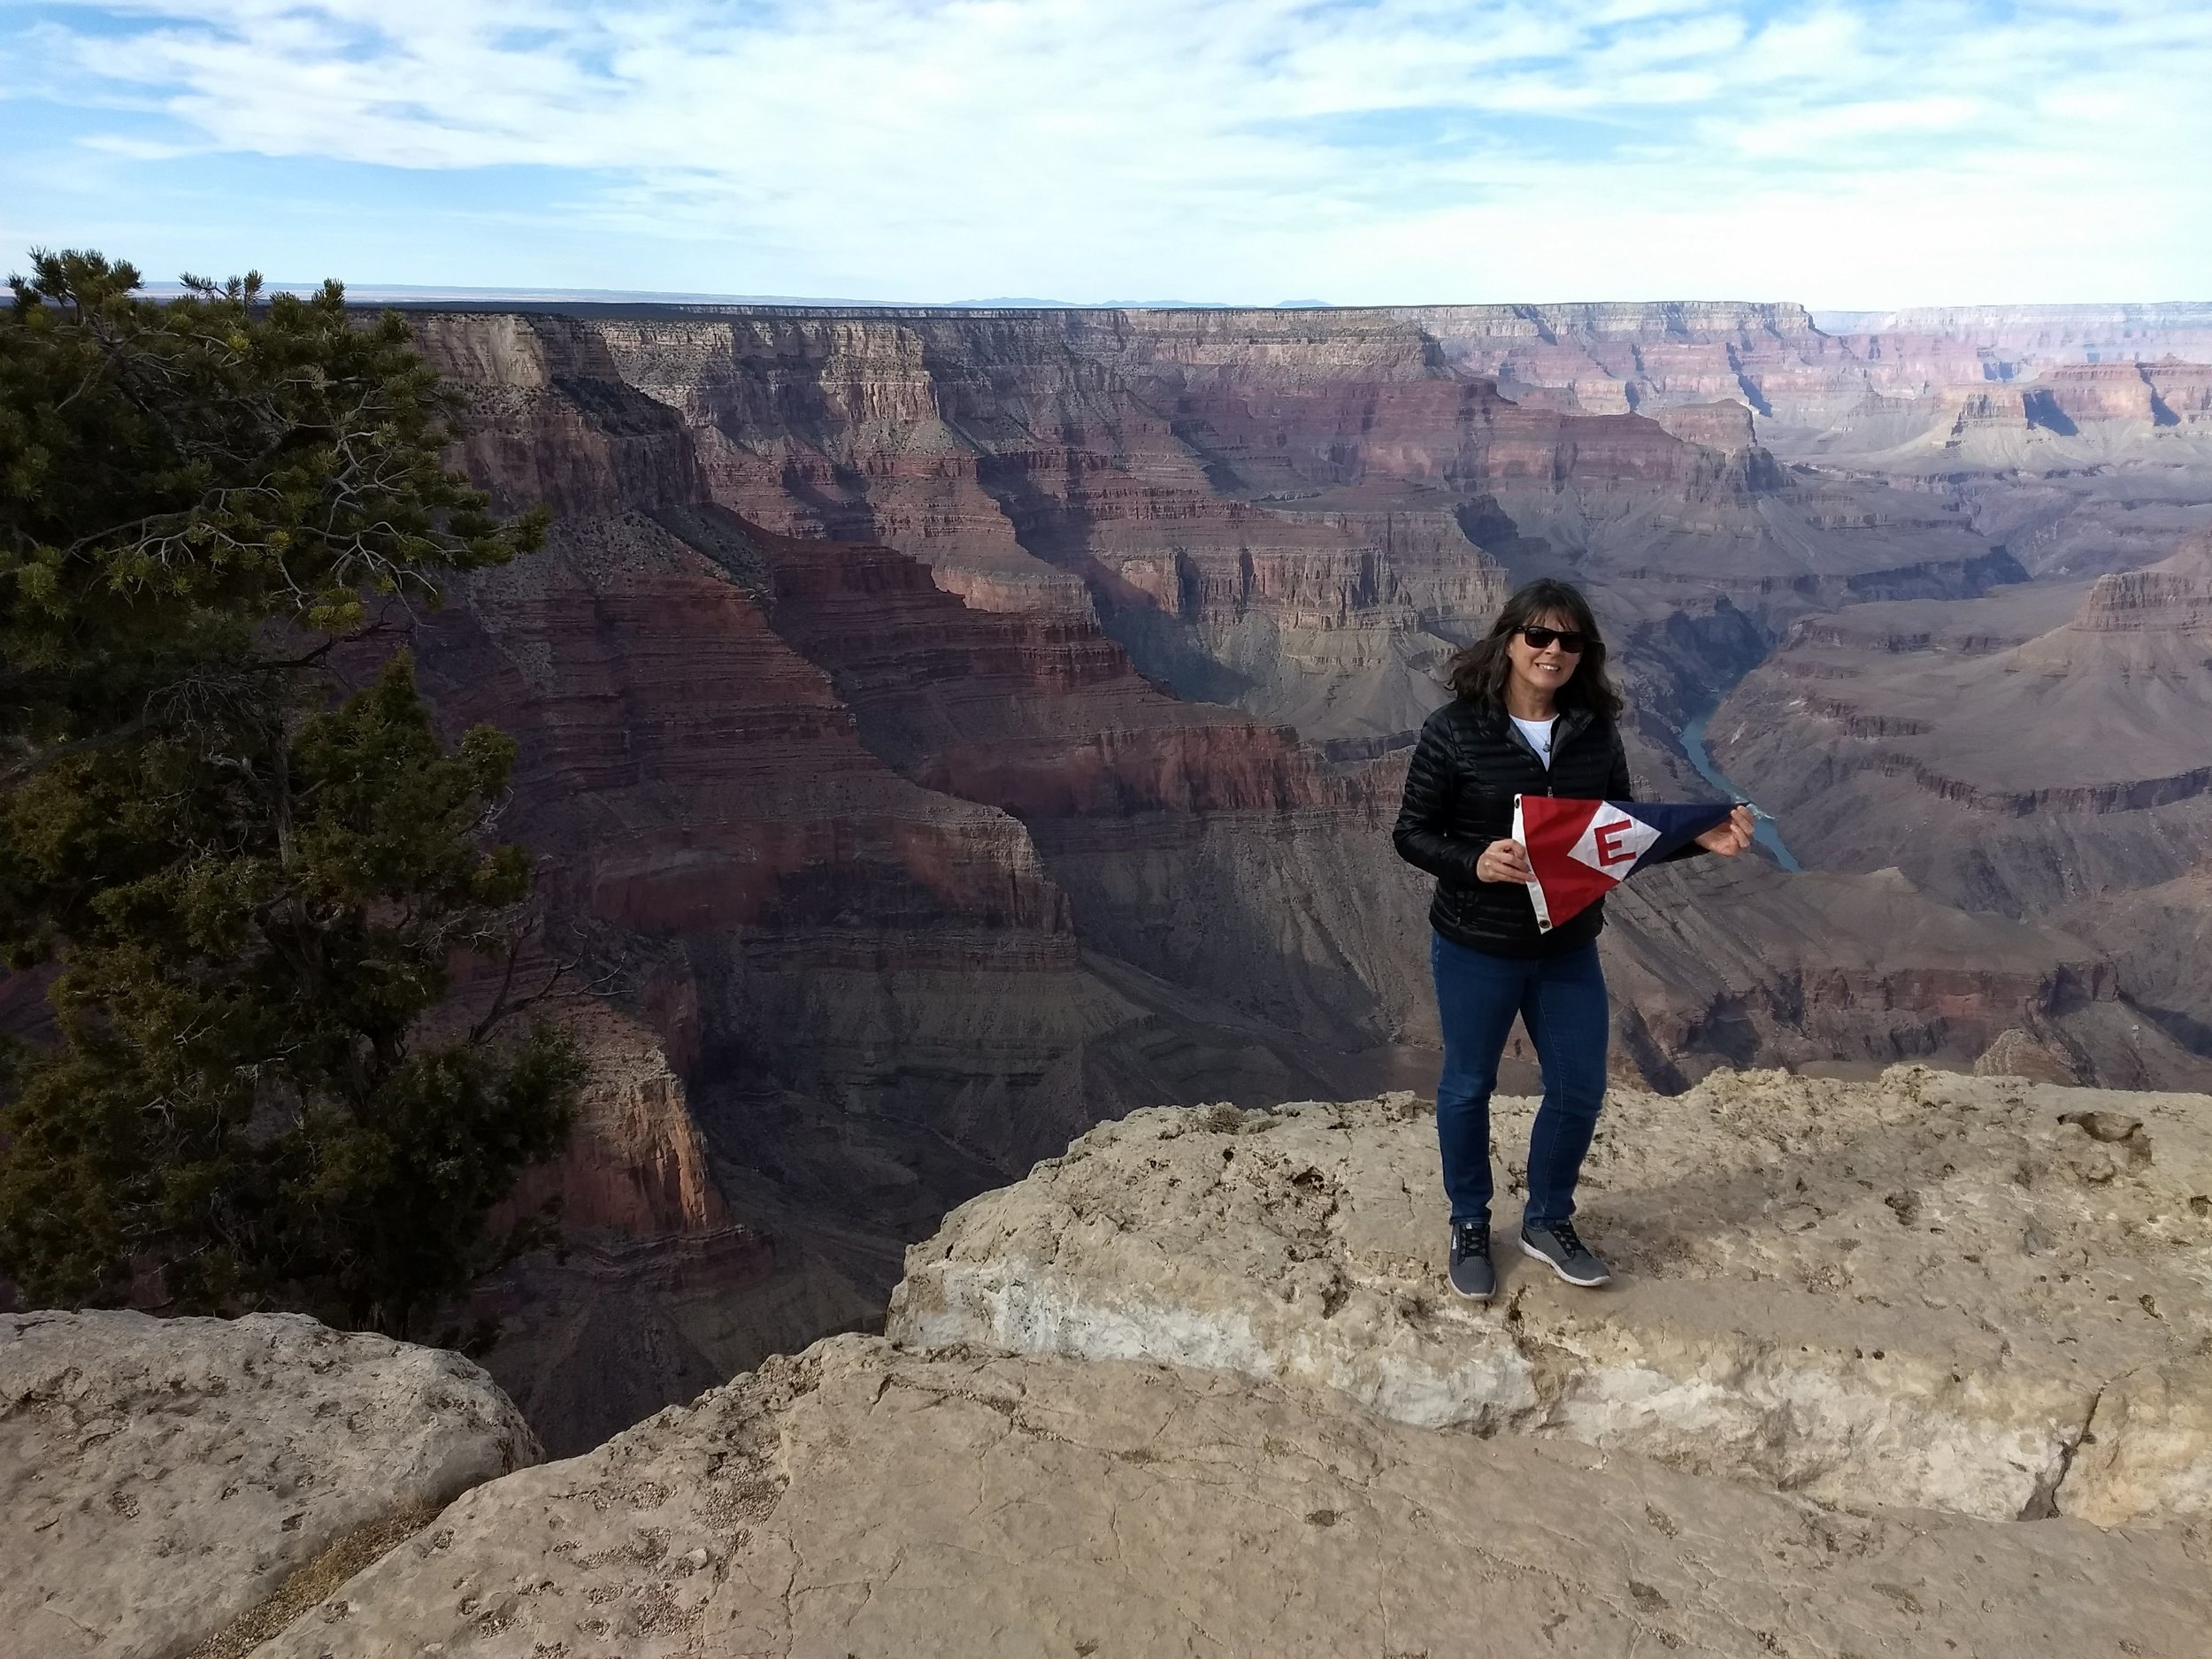  Karen proudly showing the EYC colors at the Grand Canyon, Arizona 